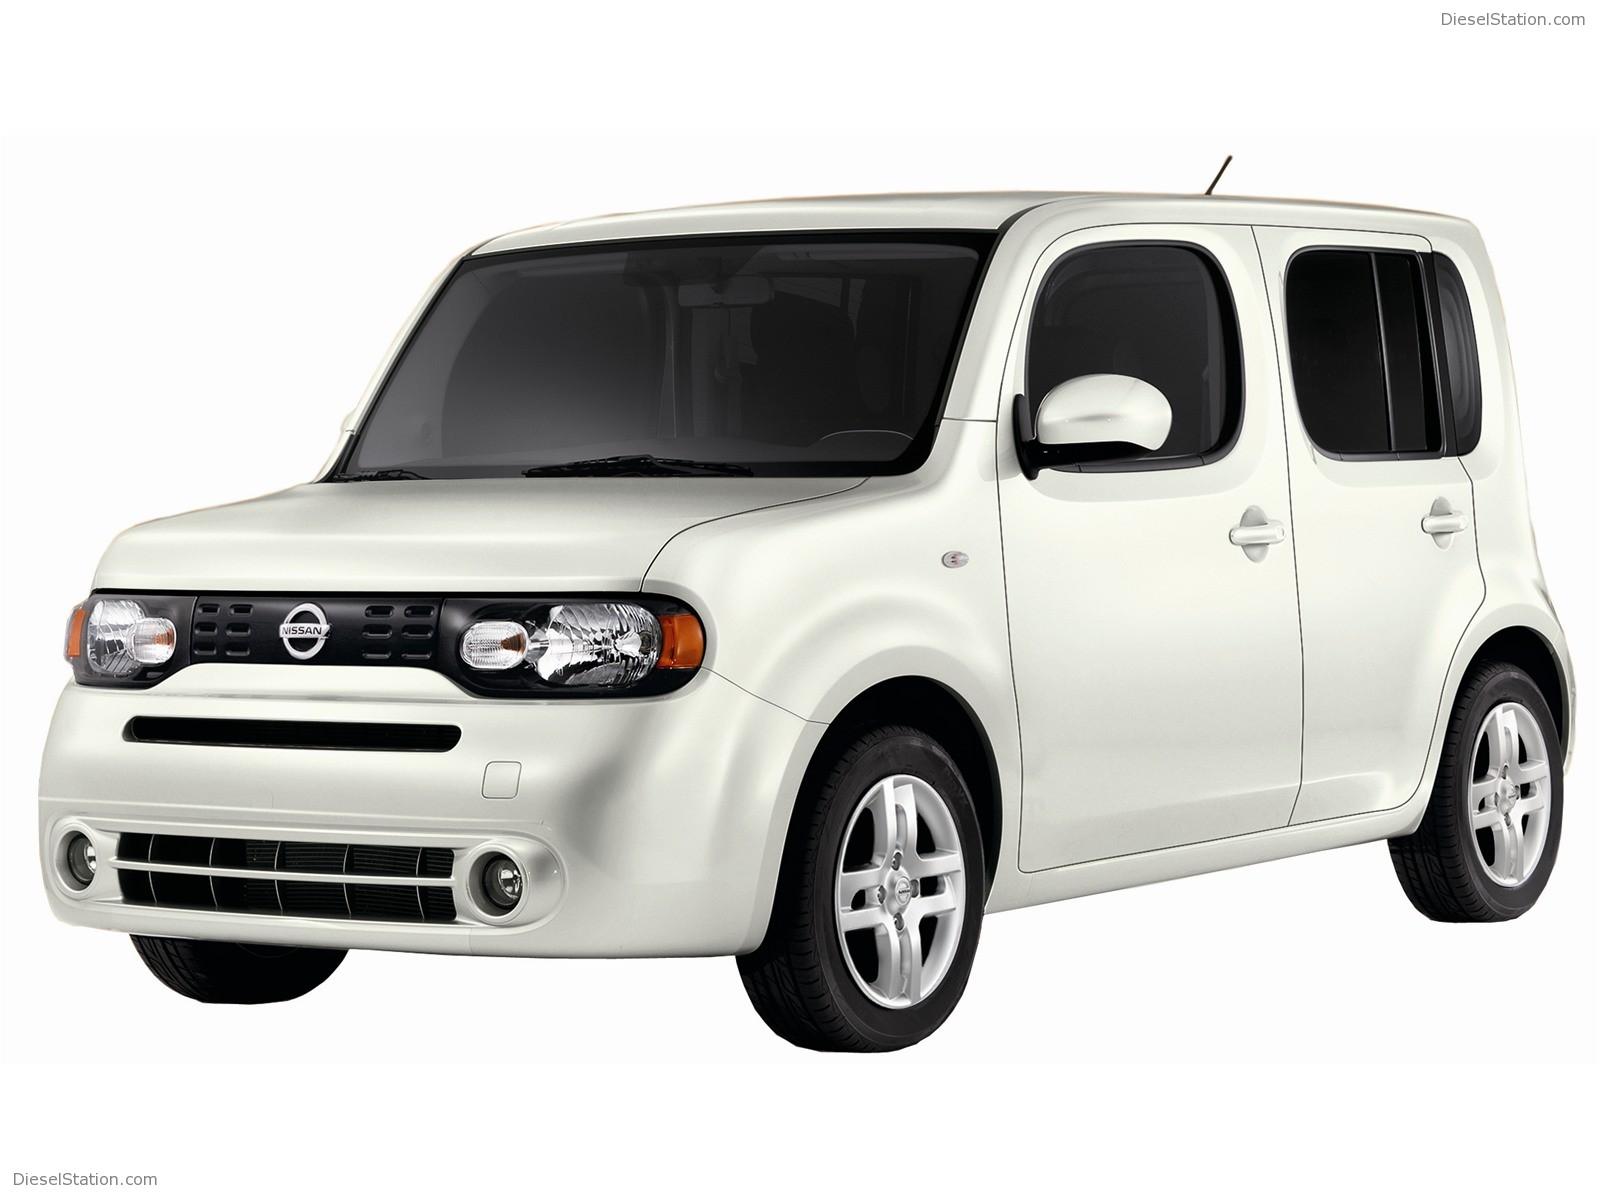 Nissan Cube Exotic Car Wallpaper of 54, Diesel Station